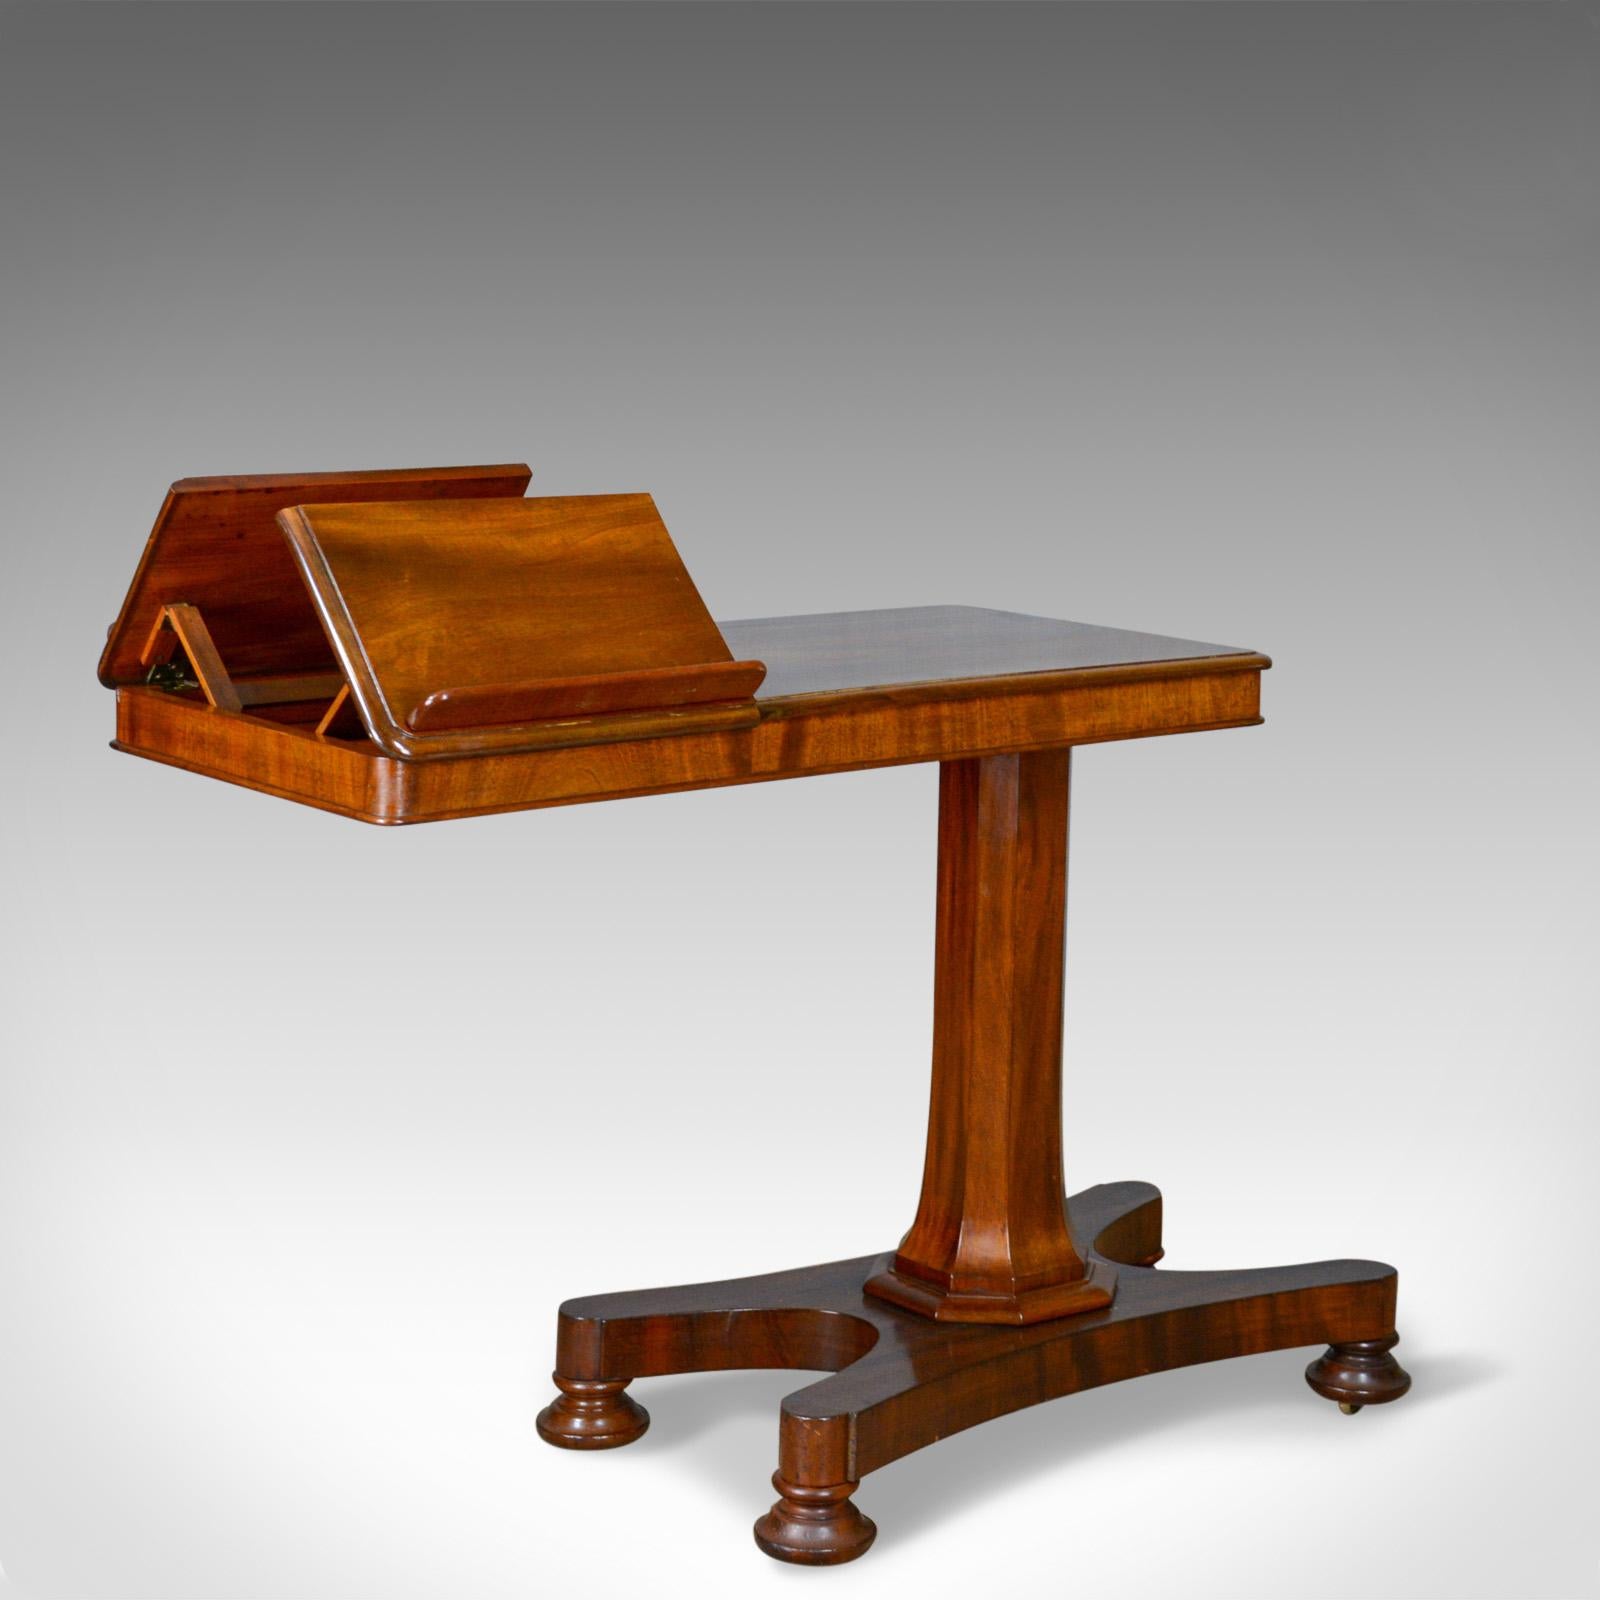 This is an antique reading table or duet music stand in the manner of Gillows, an English, Victorian, mahogany table dating to the mid 19th century, circa 1870.

Classic lines and of good proportion
Good consistent color with a wax polished